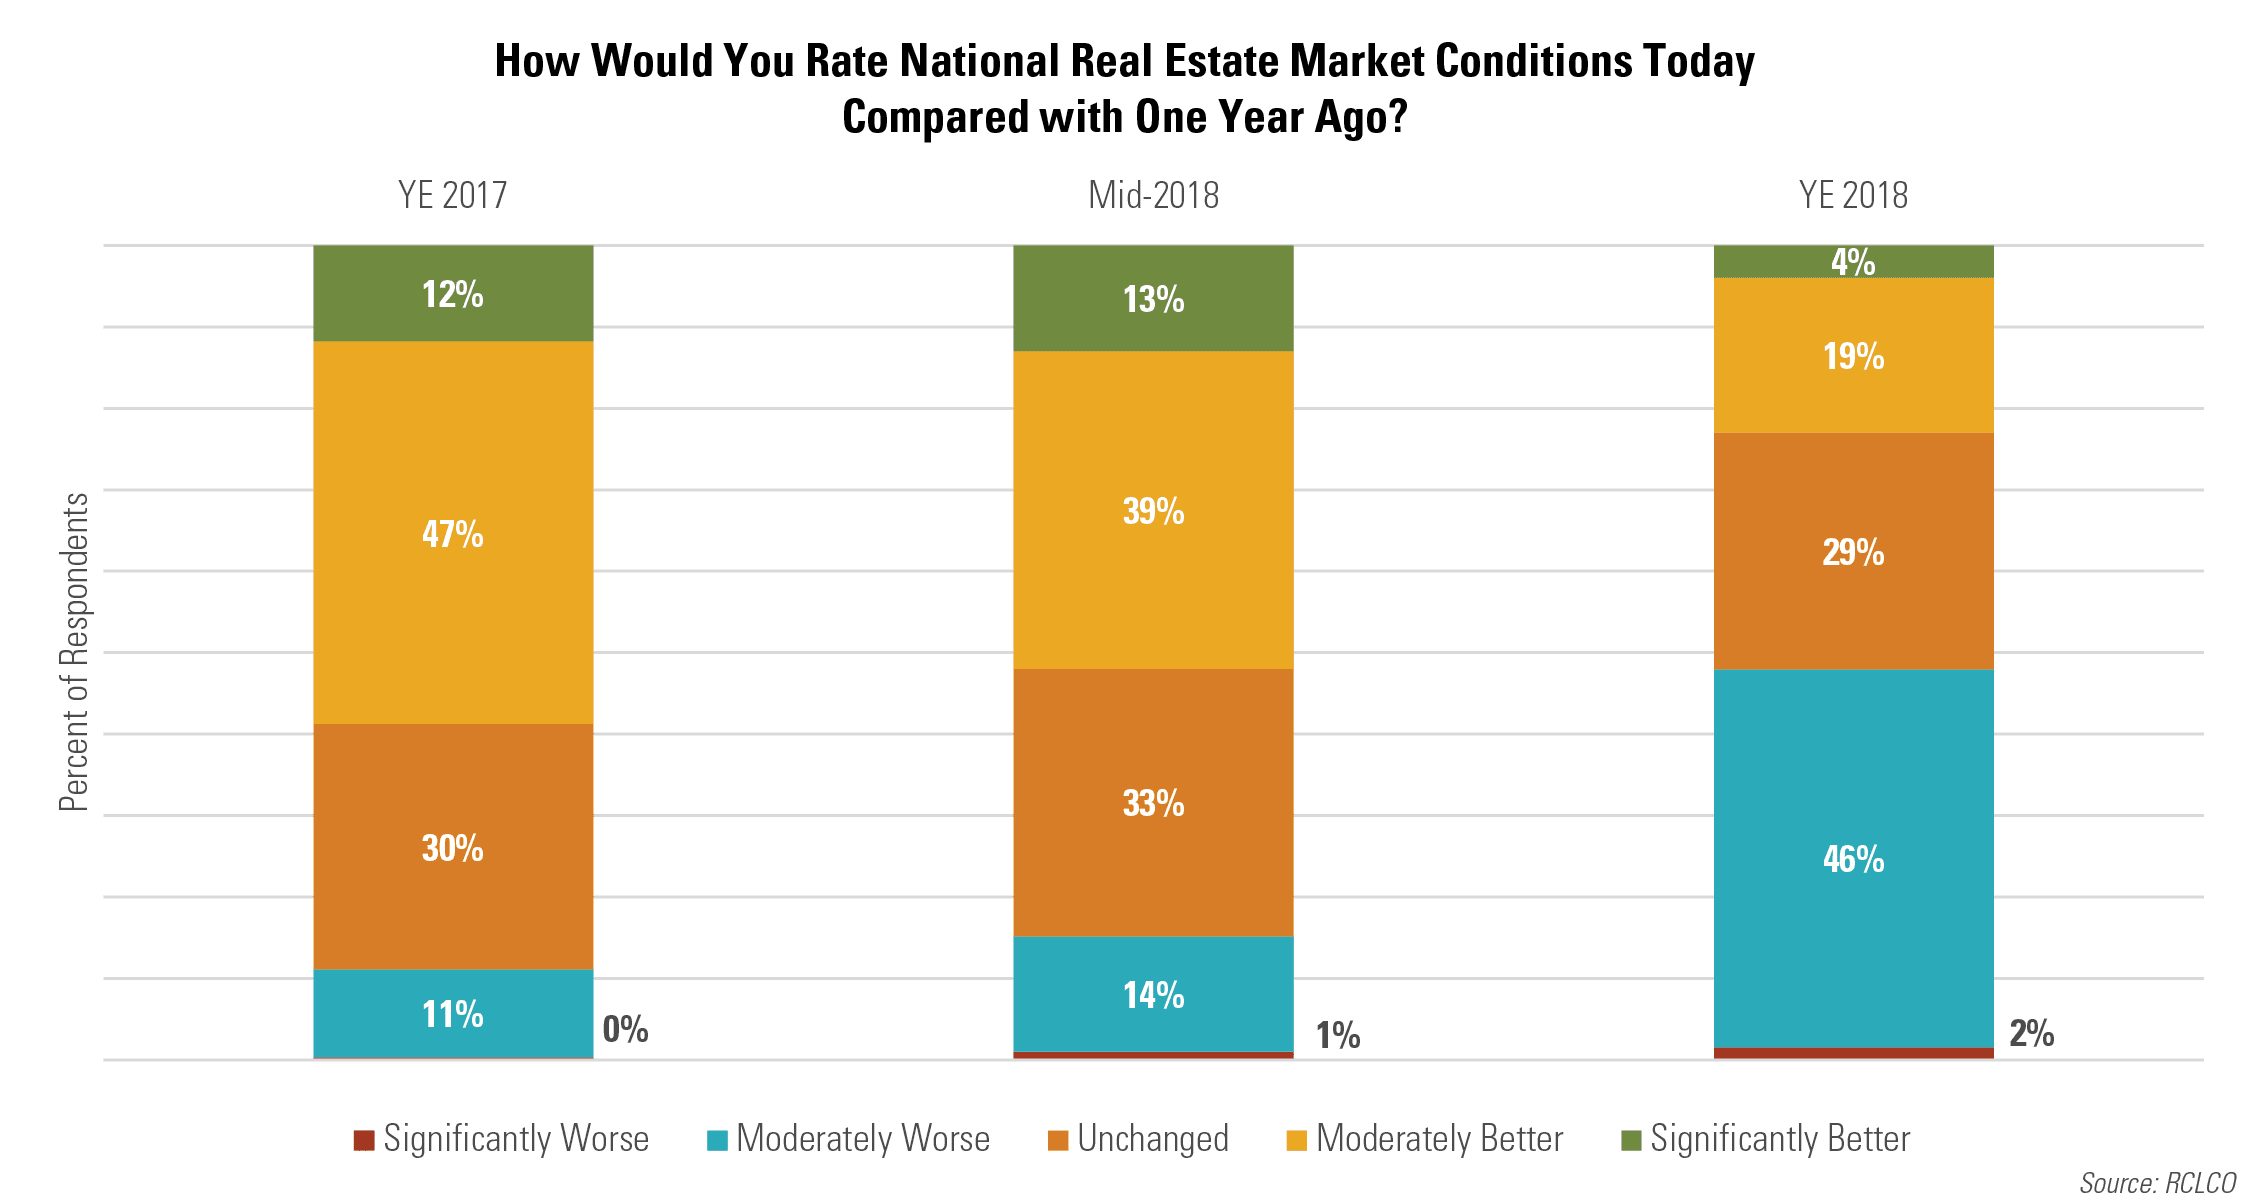 How would you rate national real estate market conditions today compared with one year ago?